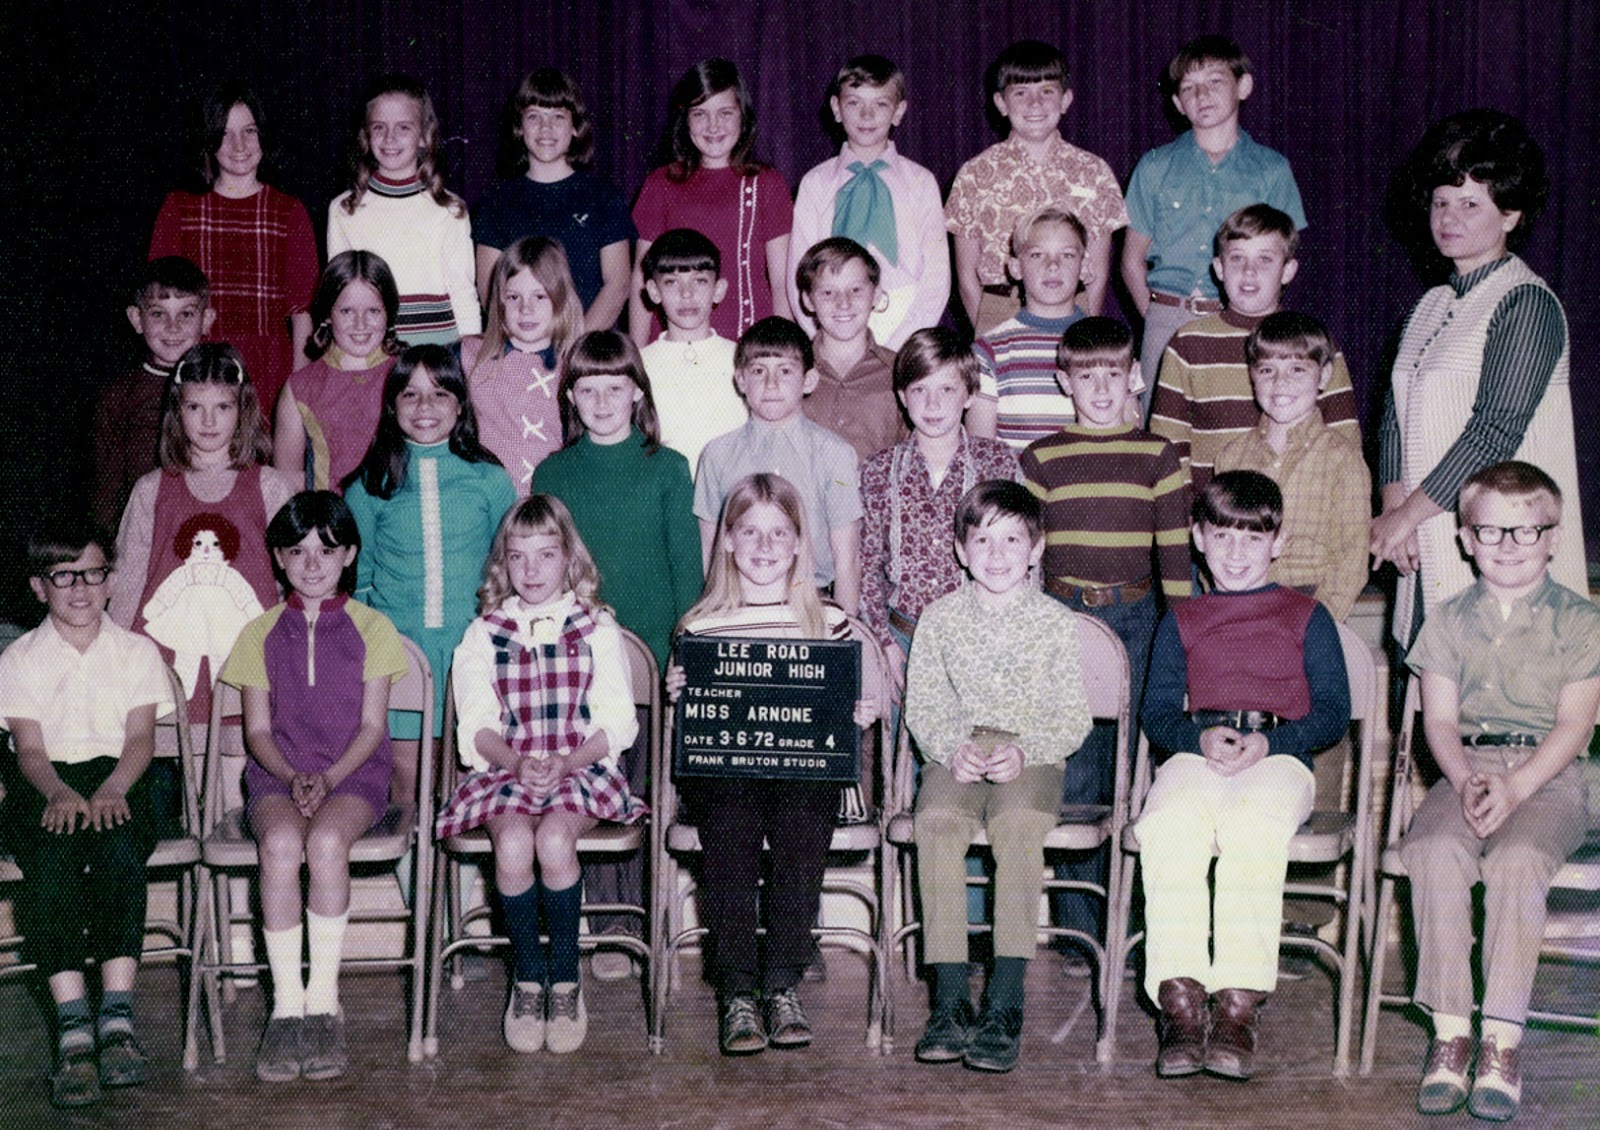 Tammany Family: Lee Road Jr High Class Pictures - 1972